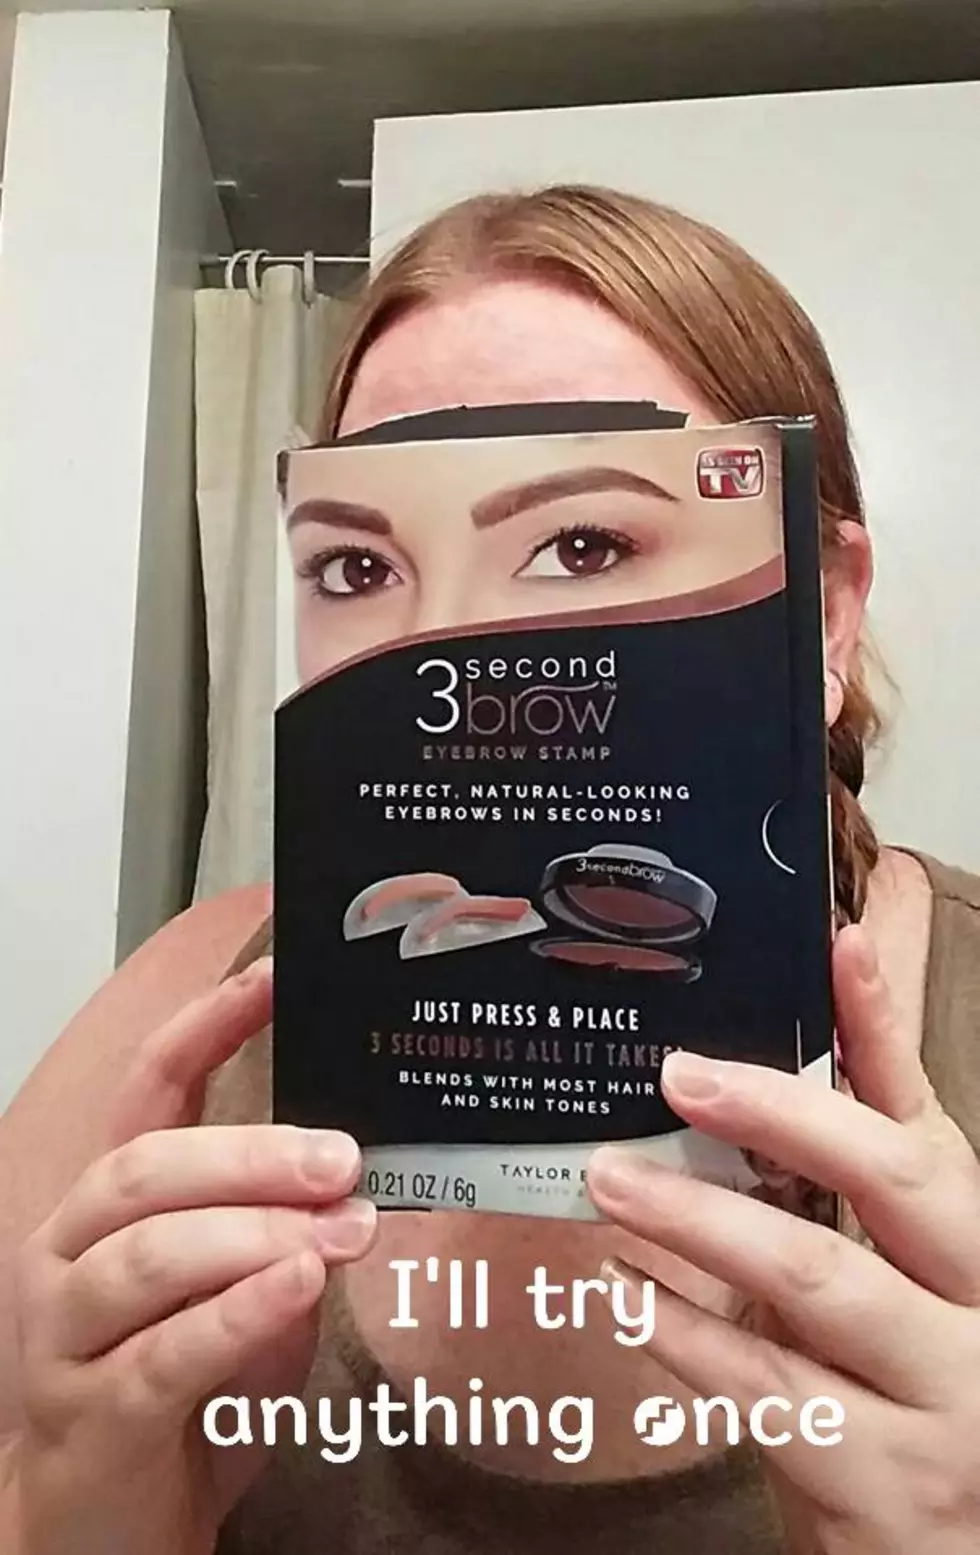 Woman’s Quest for Strong ‘Brow Game Has Me Laughing [PHOTOS]